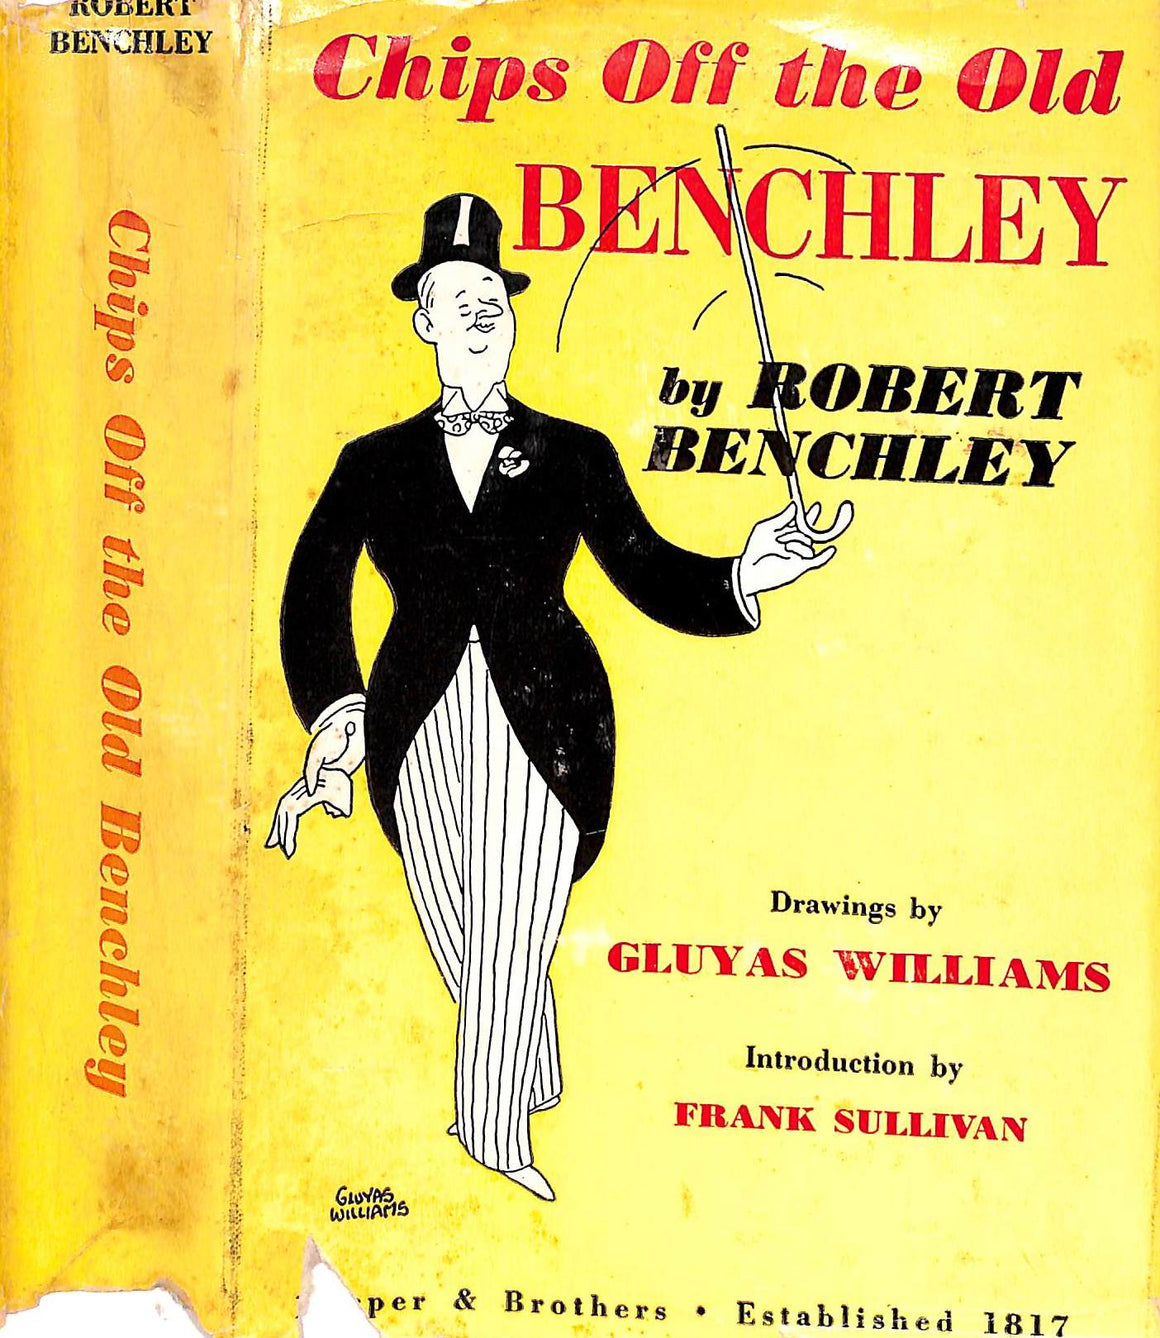 "Chips Off The Old Benchley" 1949 BENCHLEY, Robert